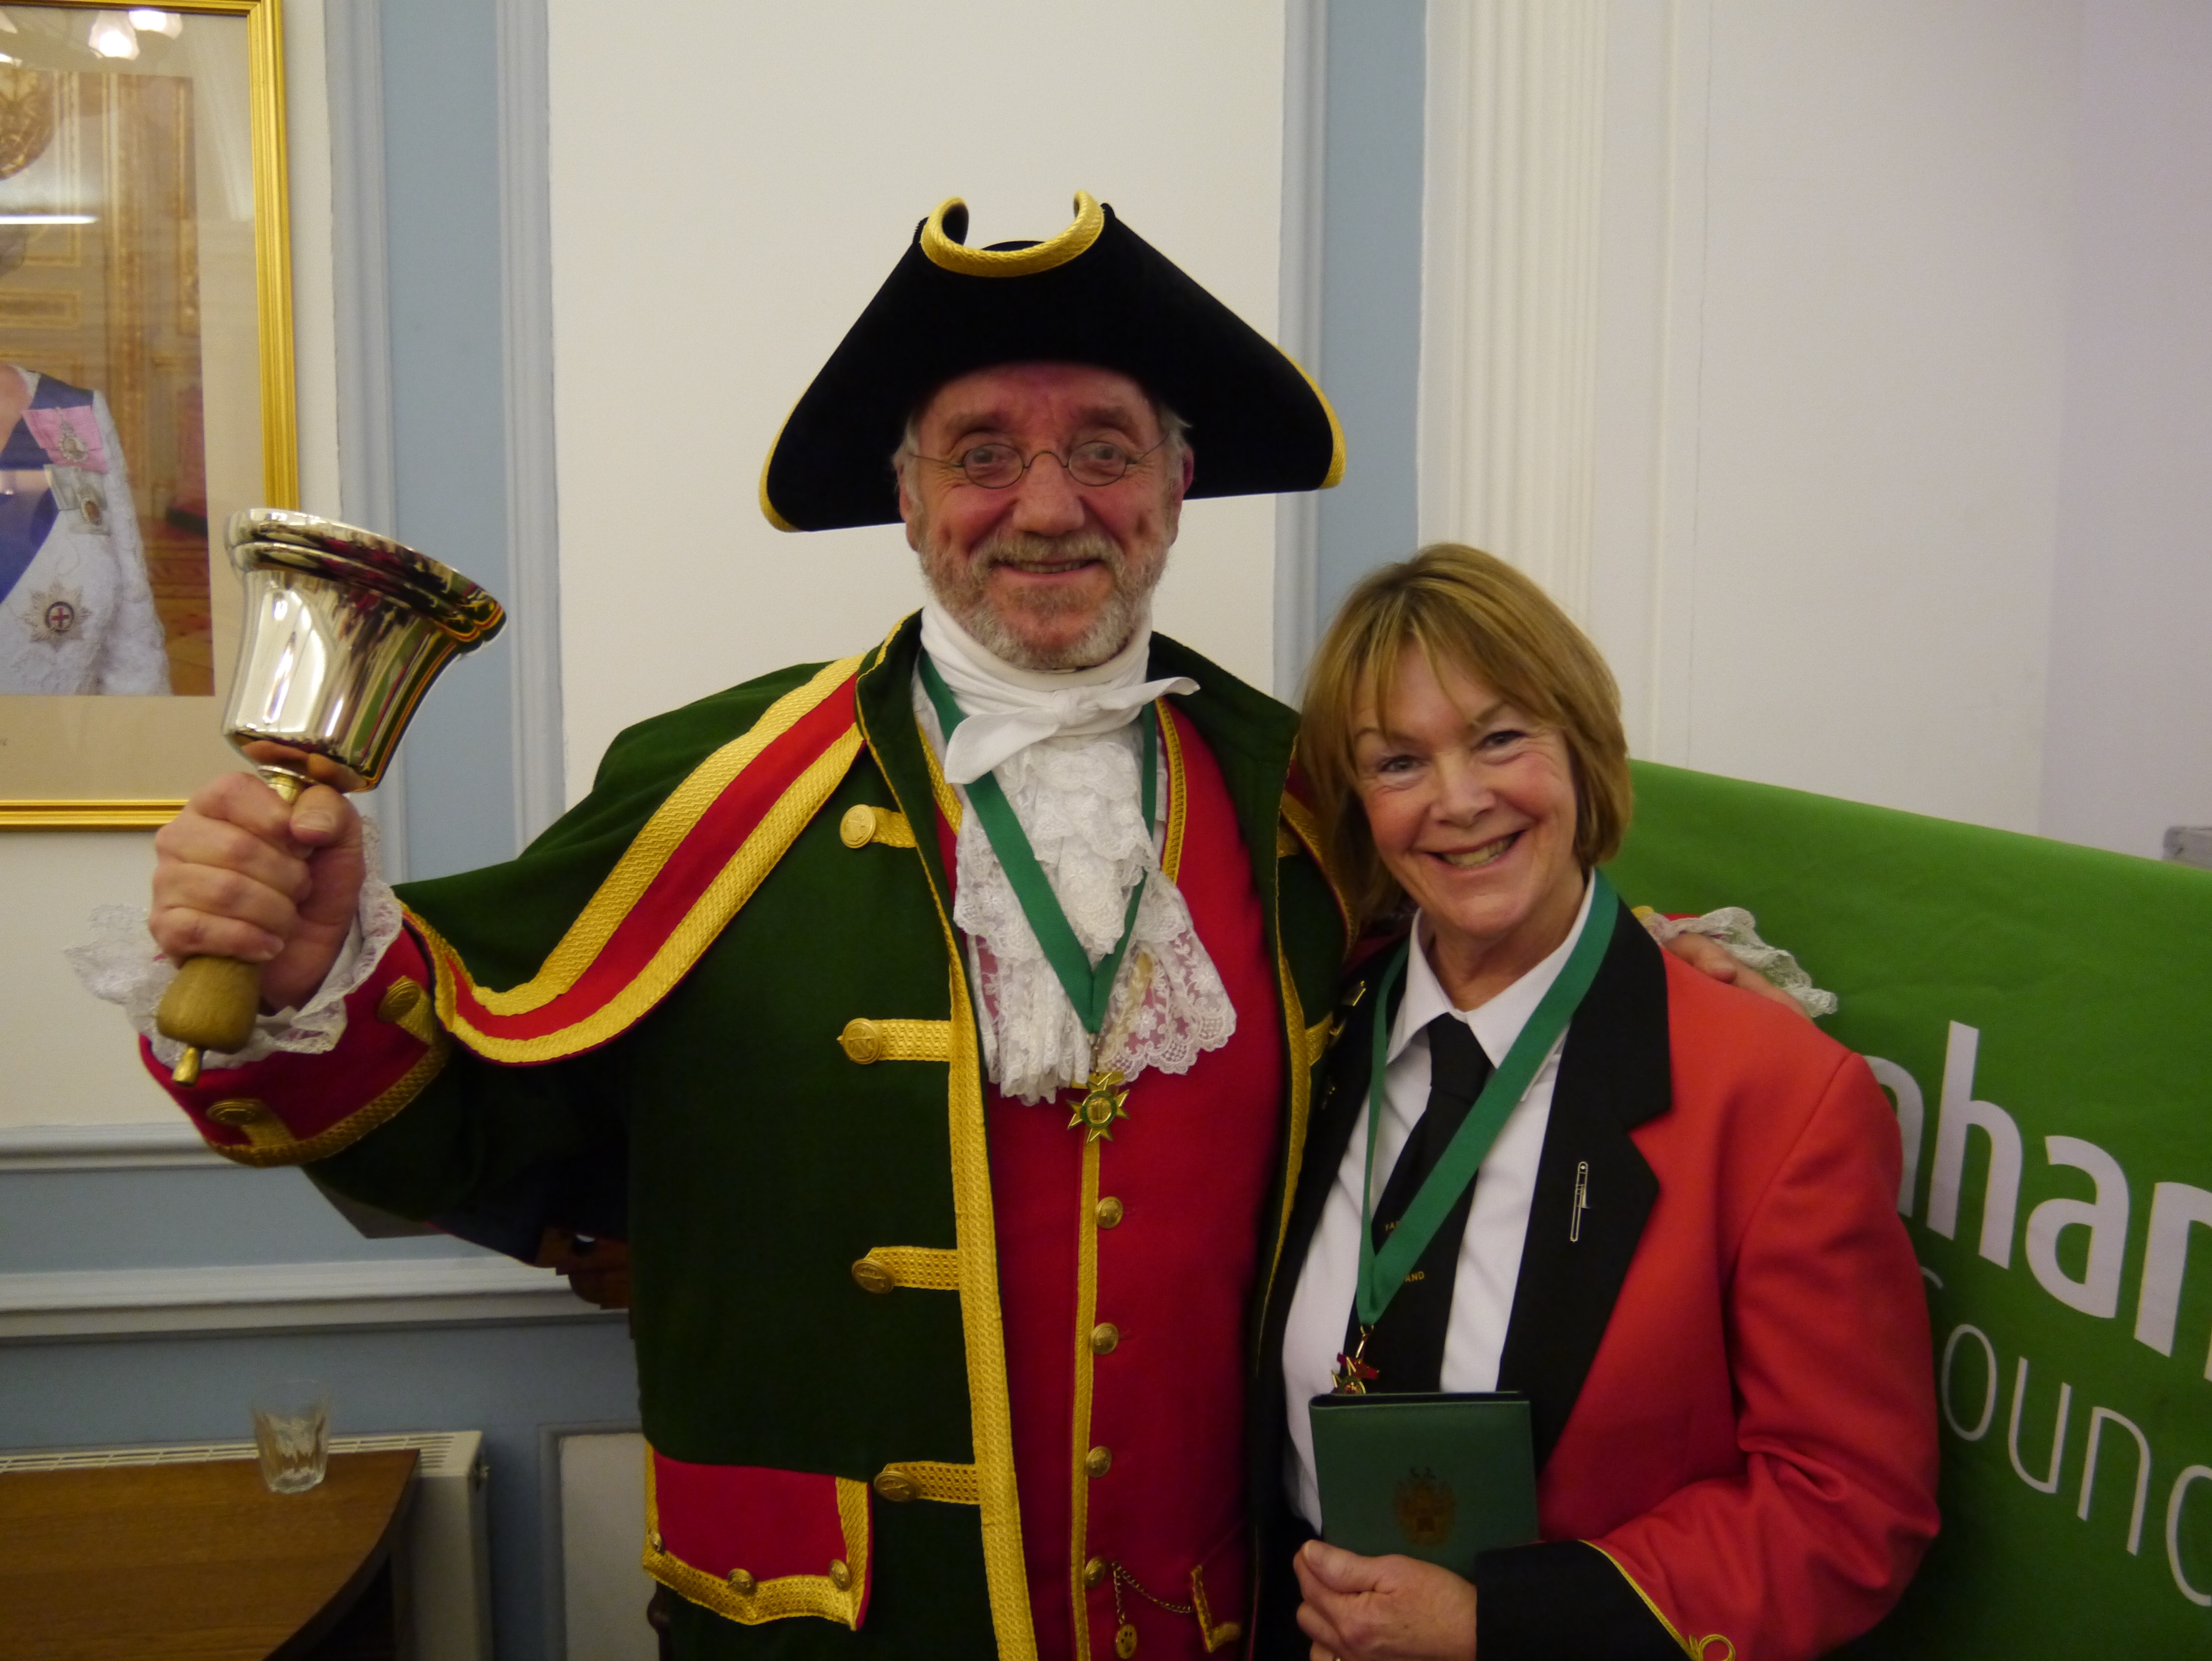 Liz with Town Cryer 2018